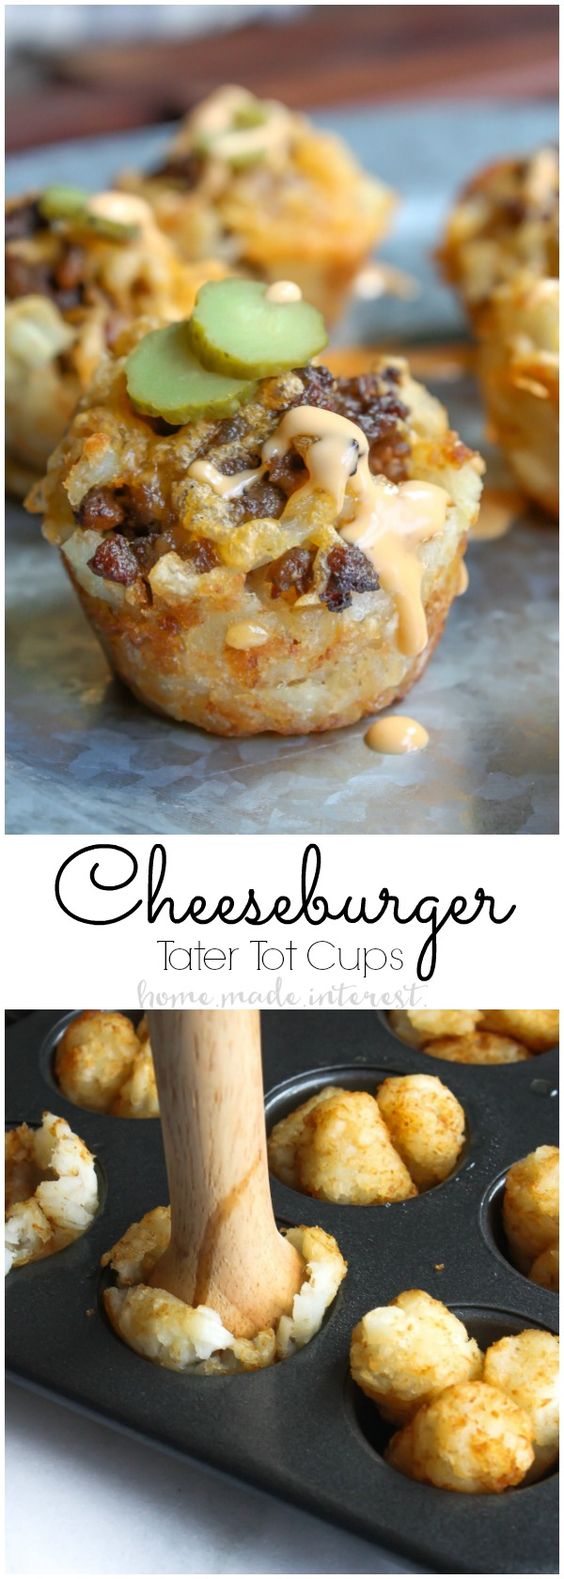 These Cheeseburger tots are tater tot bites filled with hamburger, cheese, pickles, and a special sauce. It’s like a bite size Big Mac served in a tater tot cup! This is an easy game day recipe for your upcoming super bowl party! It is an easy party food recipe that is going to wow your friends and family. Tater tots + Cheeseburger = instant winner!